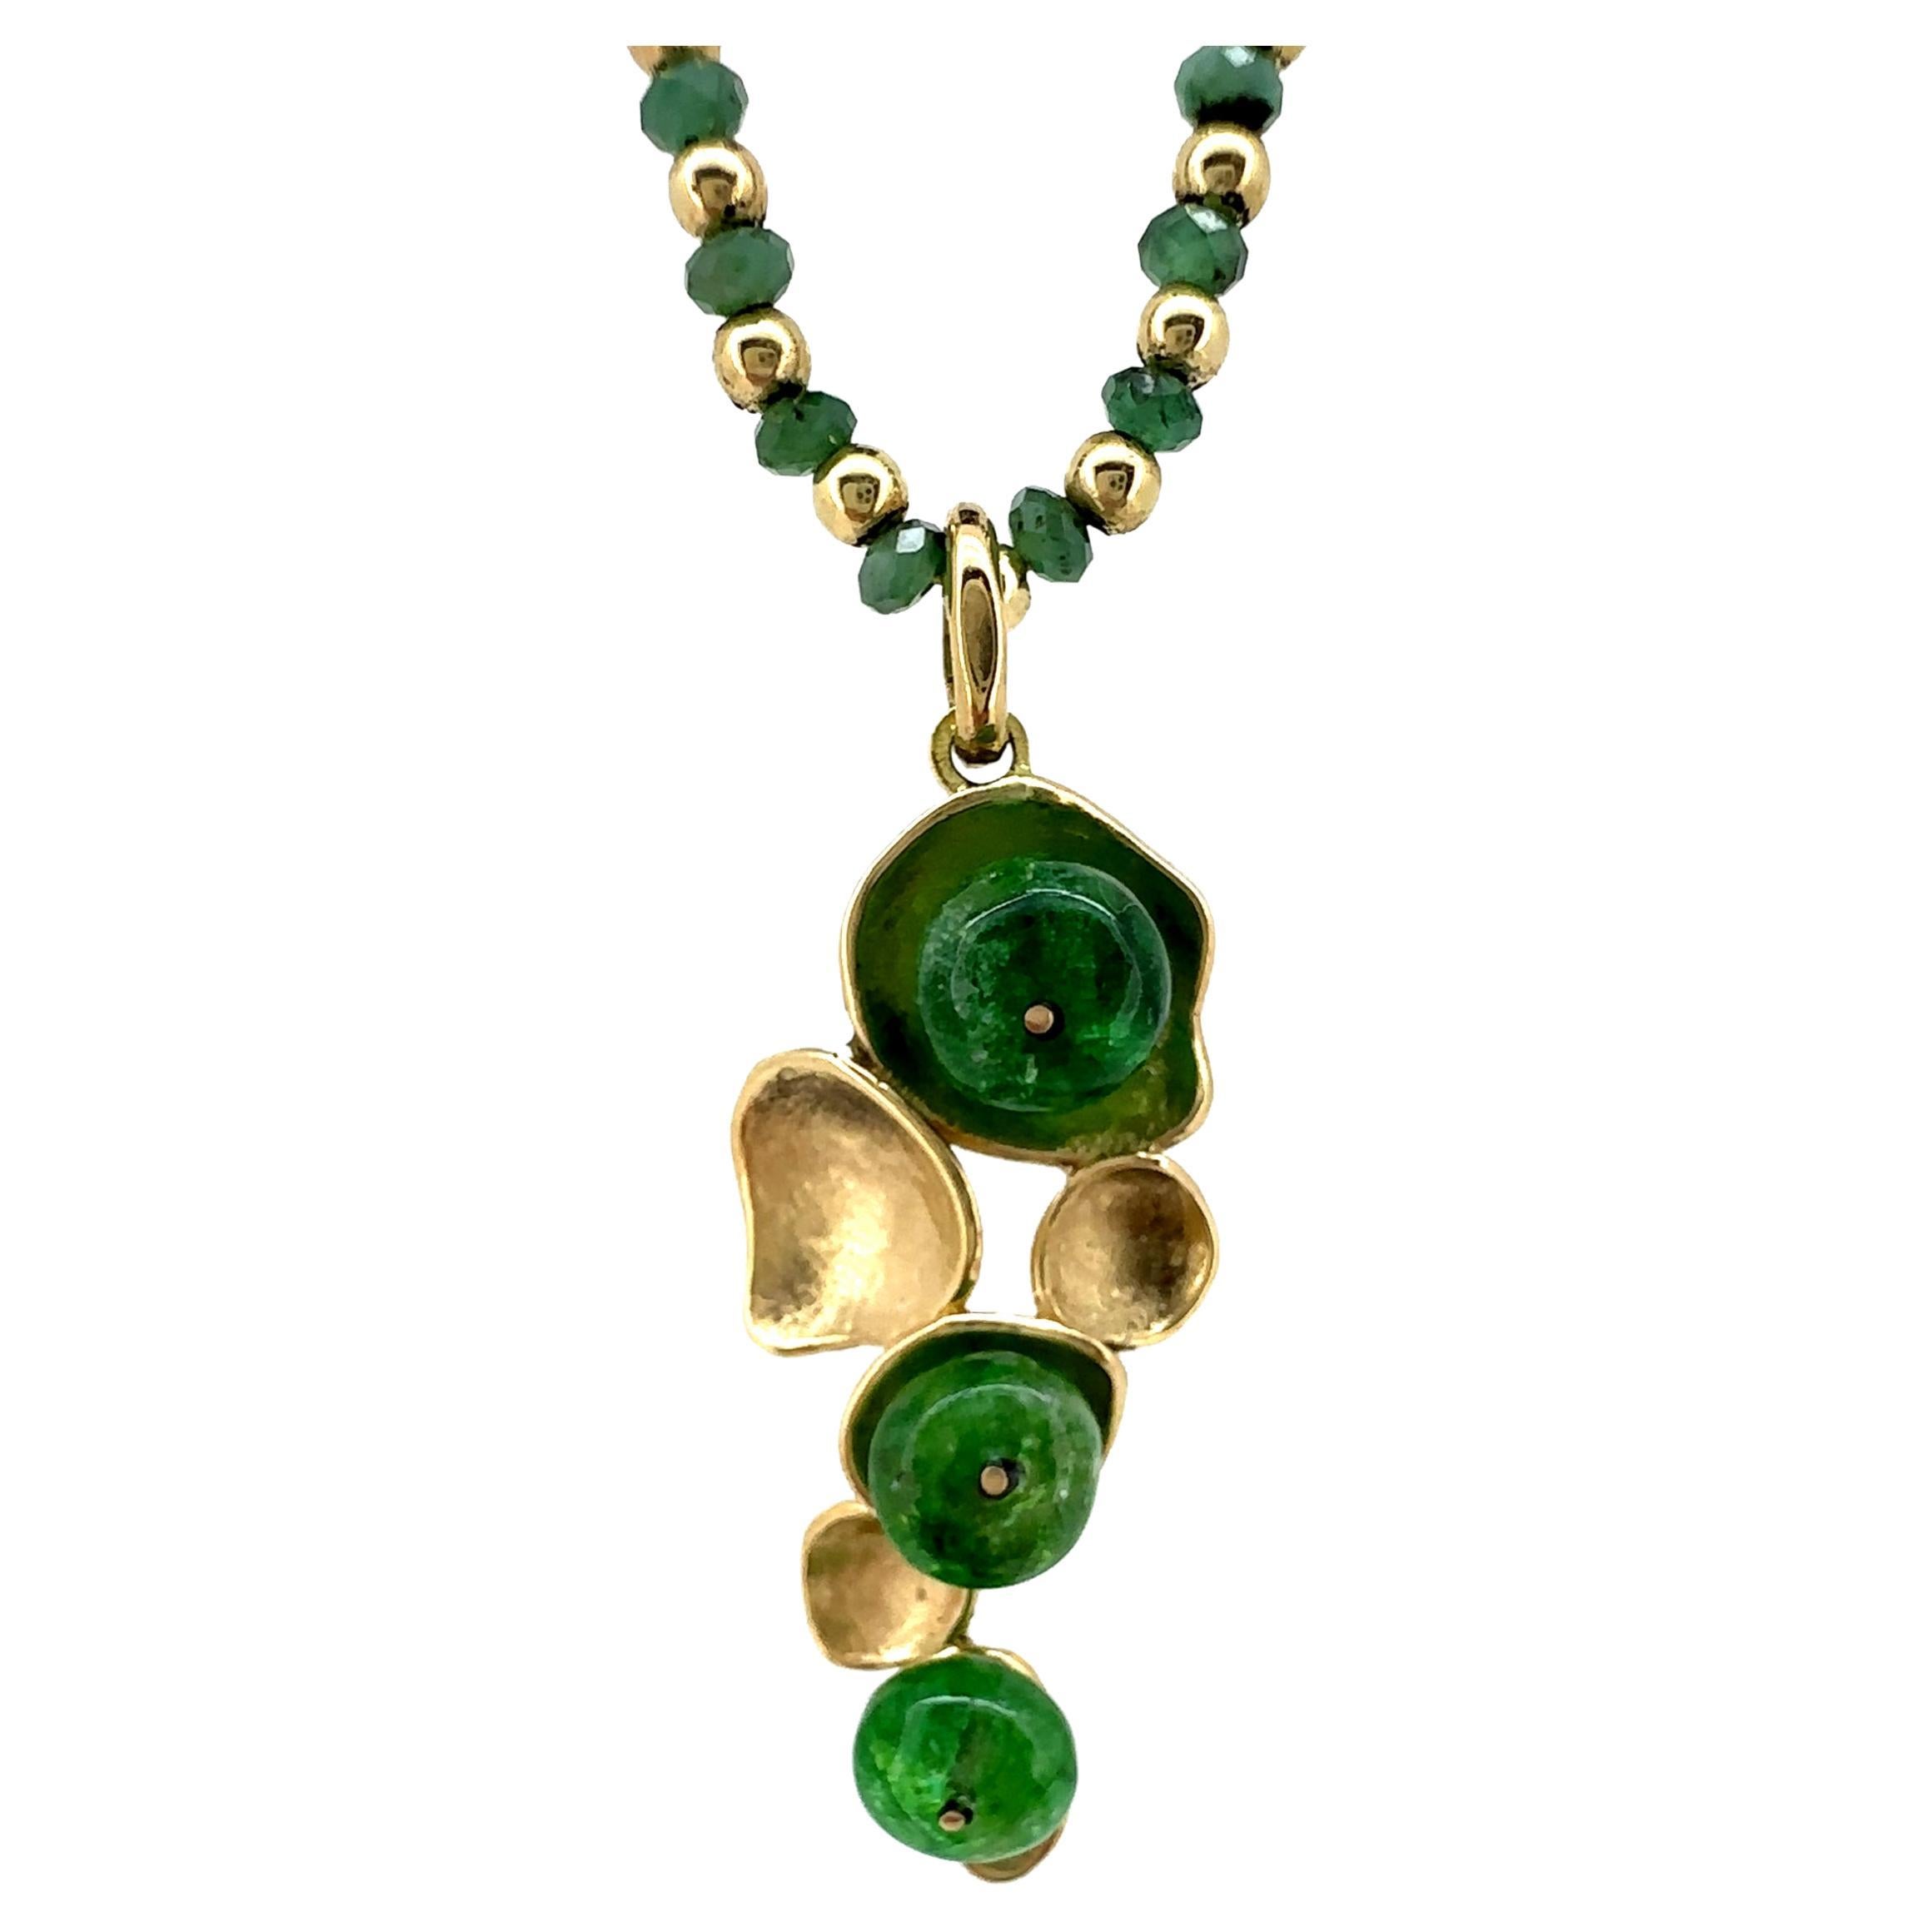 "Peperomia" Pendant in 18K Gold and Green Beryl on Gold & Emerald Bead Necklace